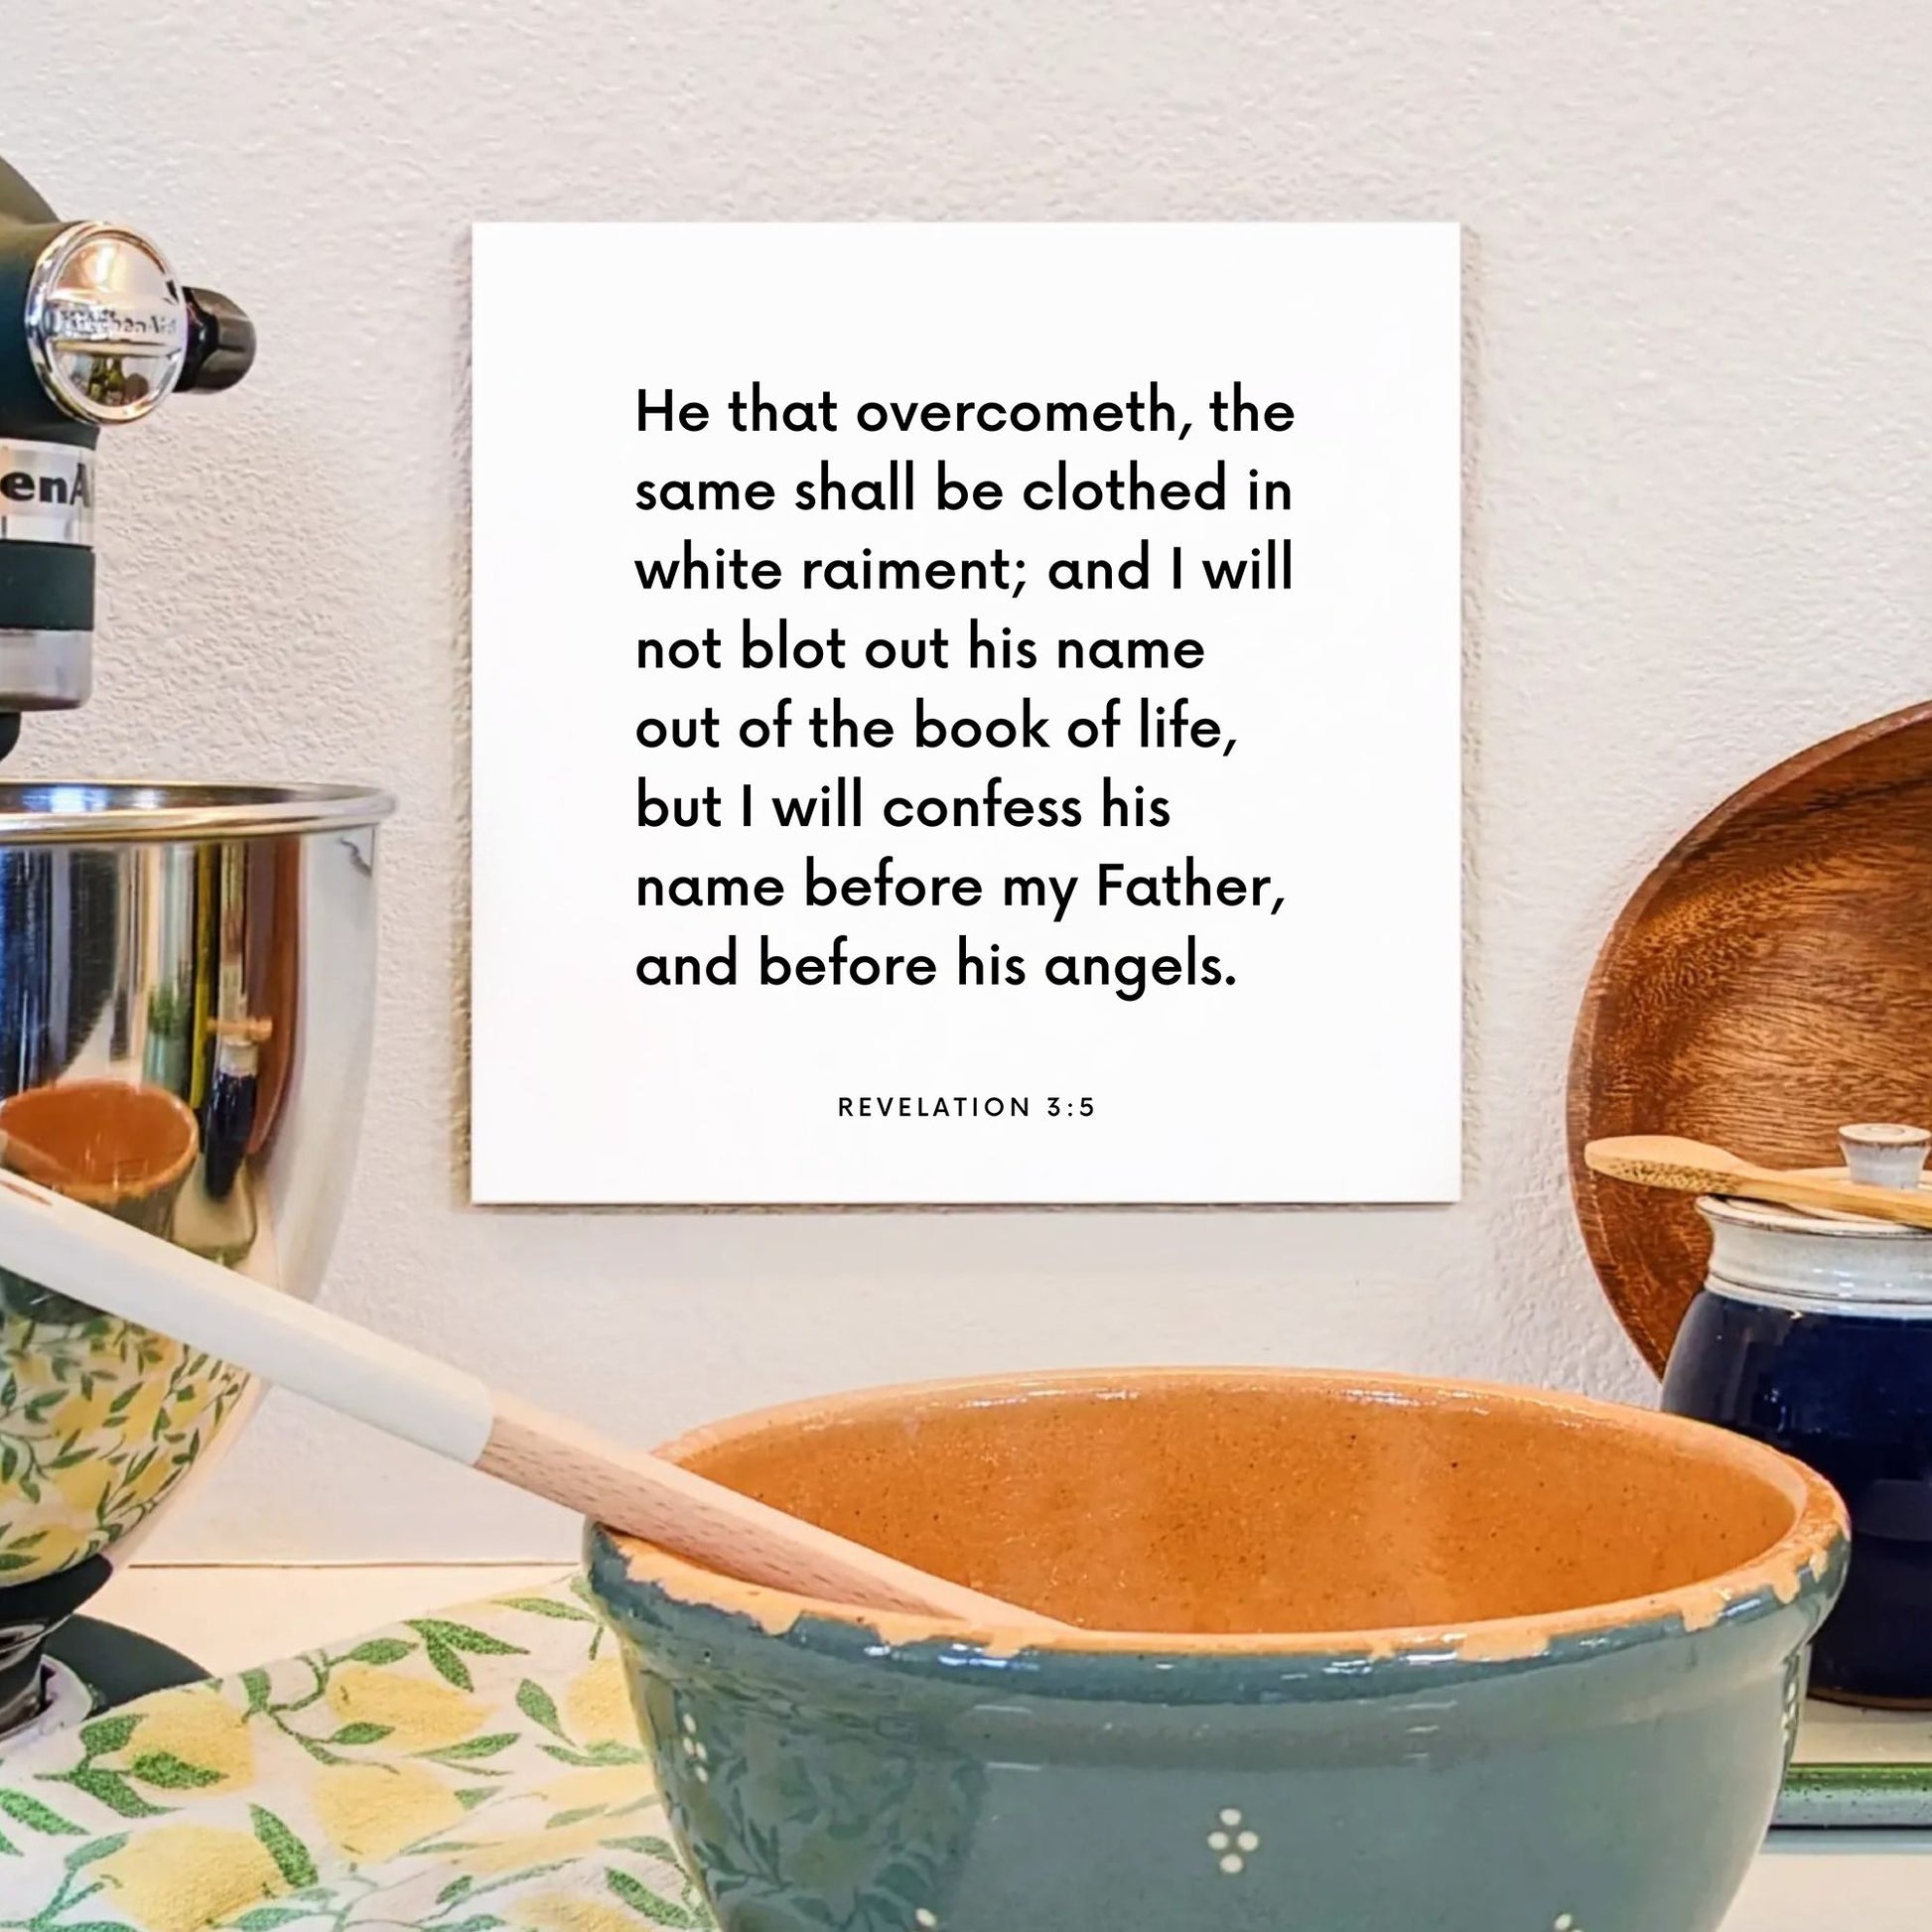 Kitchen mouting of the scripture tile for Revelation 3:5 - "I will confess his name before my Father"